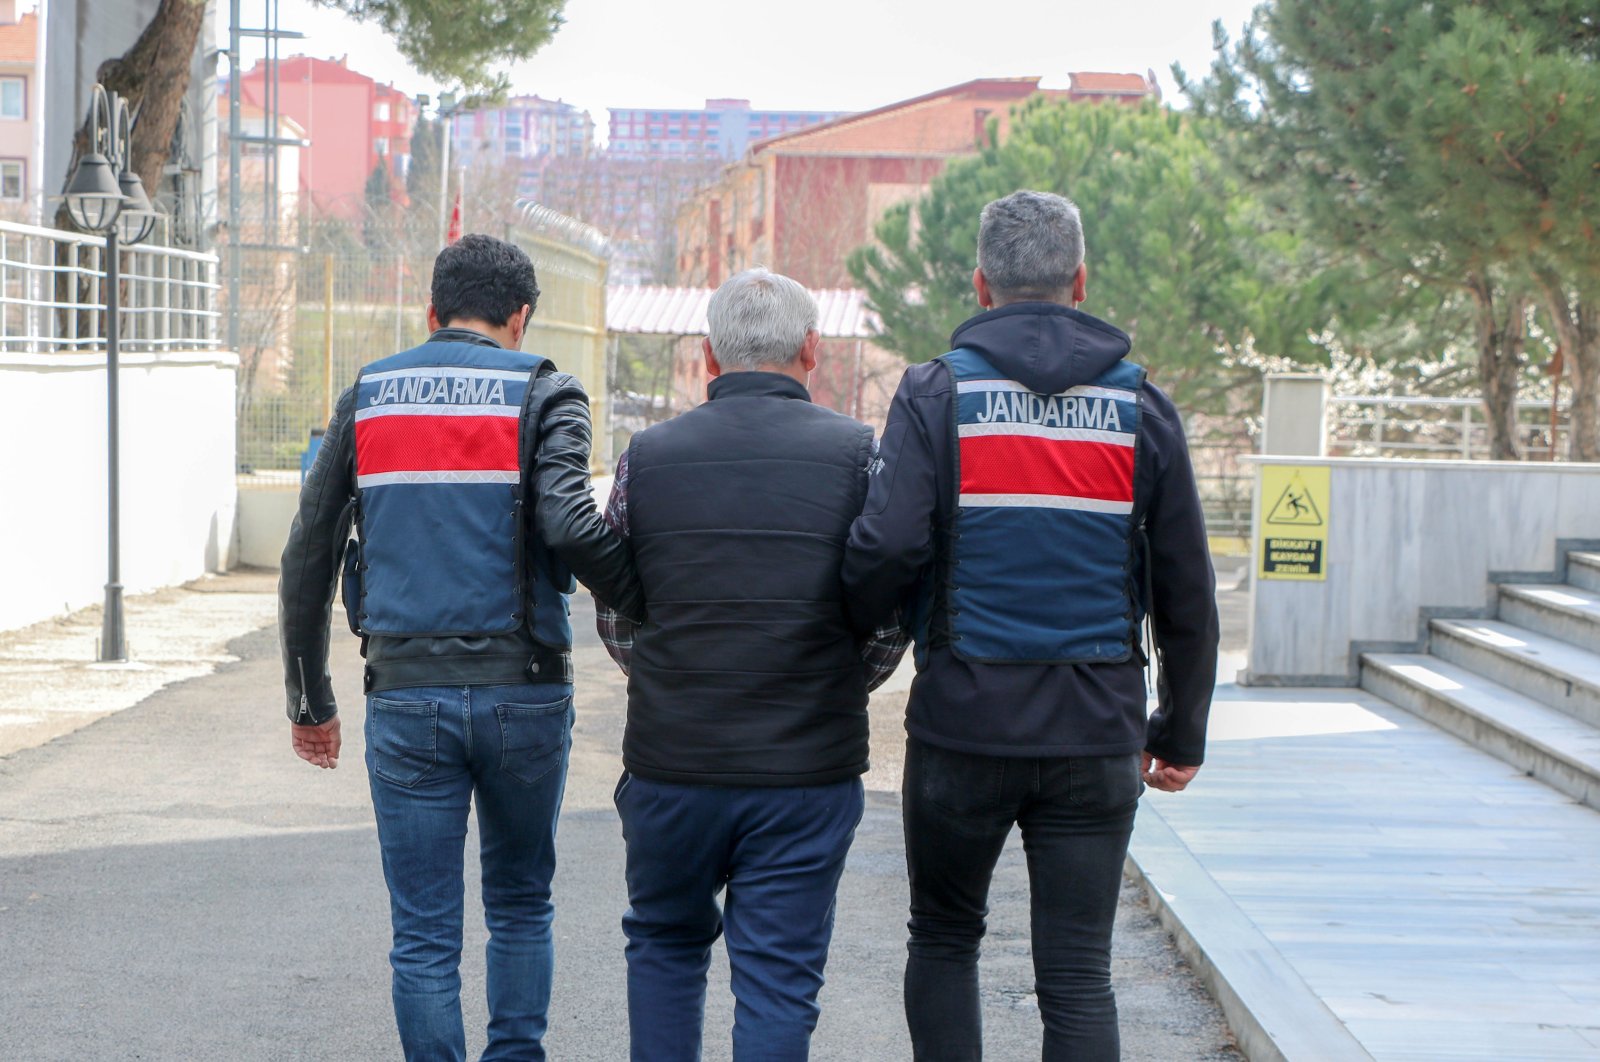 Gendarmerie officers escort one of the five suspects from the Gülenist Terror Group (FETÖ) and the PKK apprehended while trying to cross into Greece from northwestern Edirne province, Türkiye, March 30, 2023. (DHA Photo)